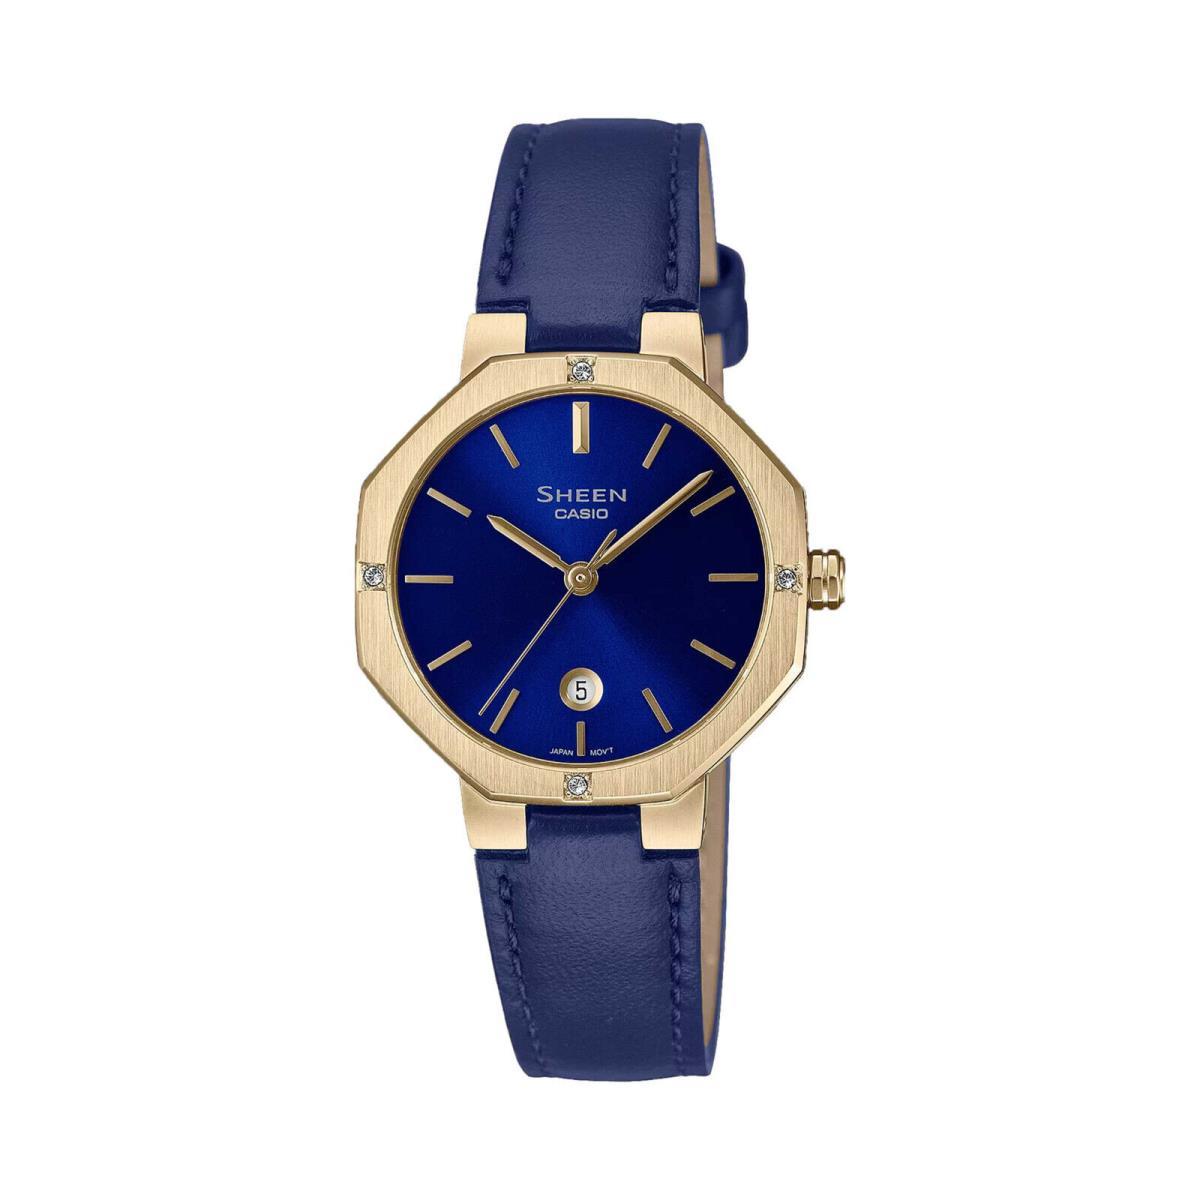 Casio Sheen Women`s Watch Blue and Gold Leather Strap with Gift Box - Dial: Blue, Band: Blue, Bezel: Gold